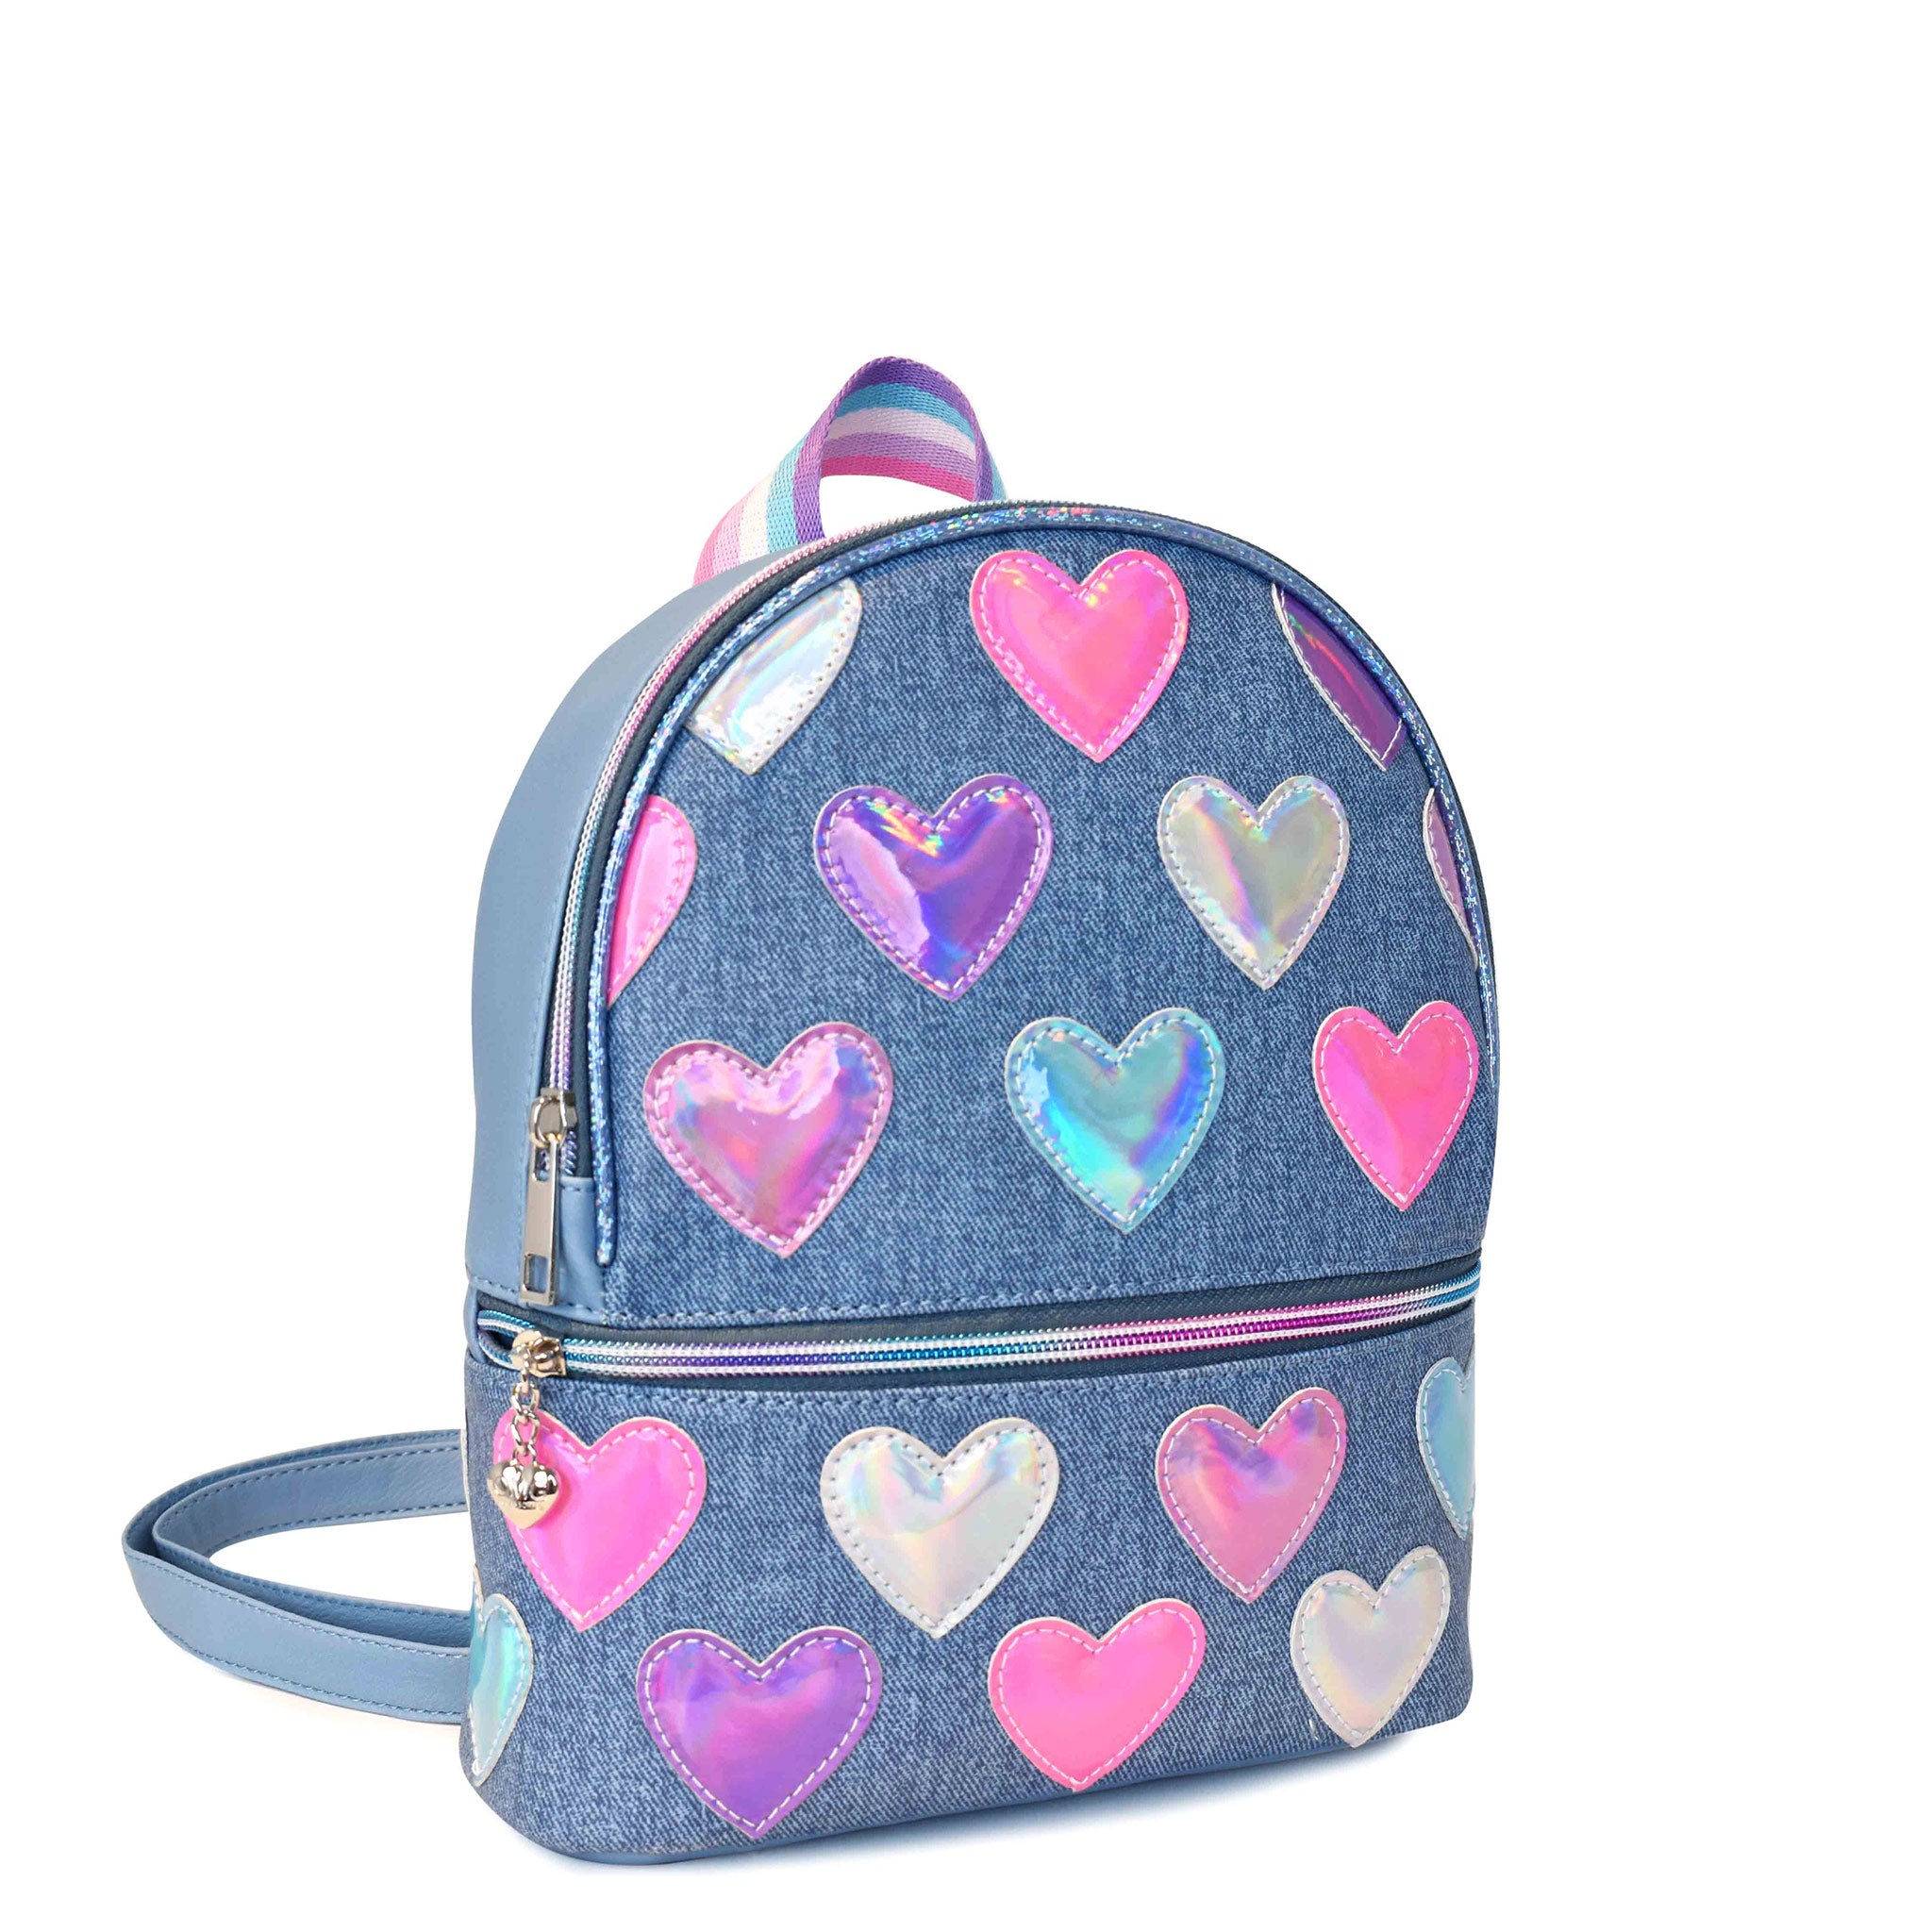 Side view of a denim mini backpack with metallic heart patches